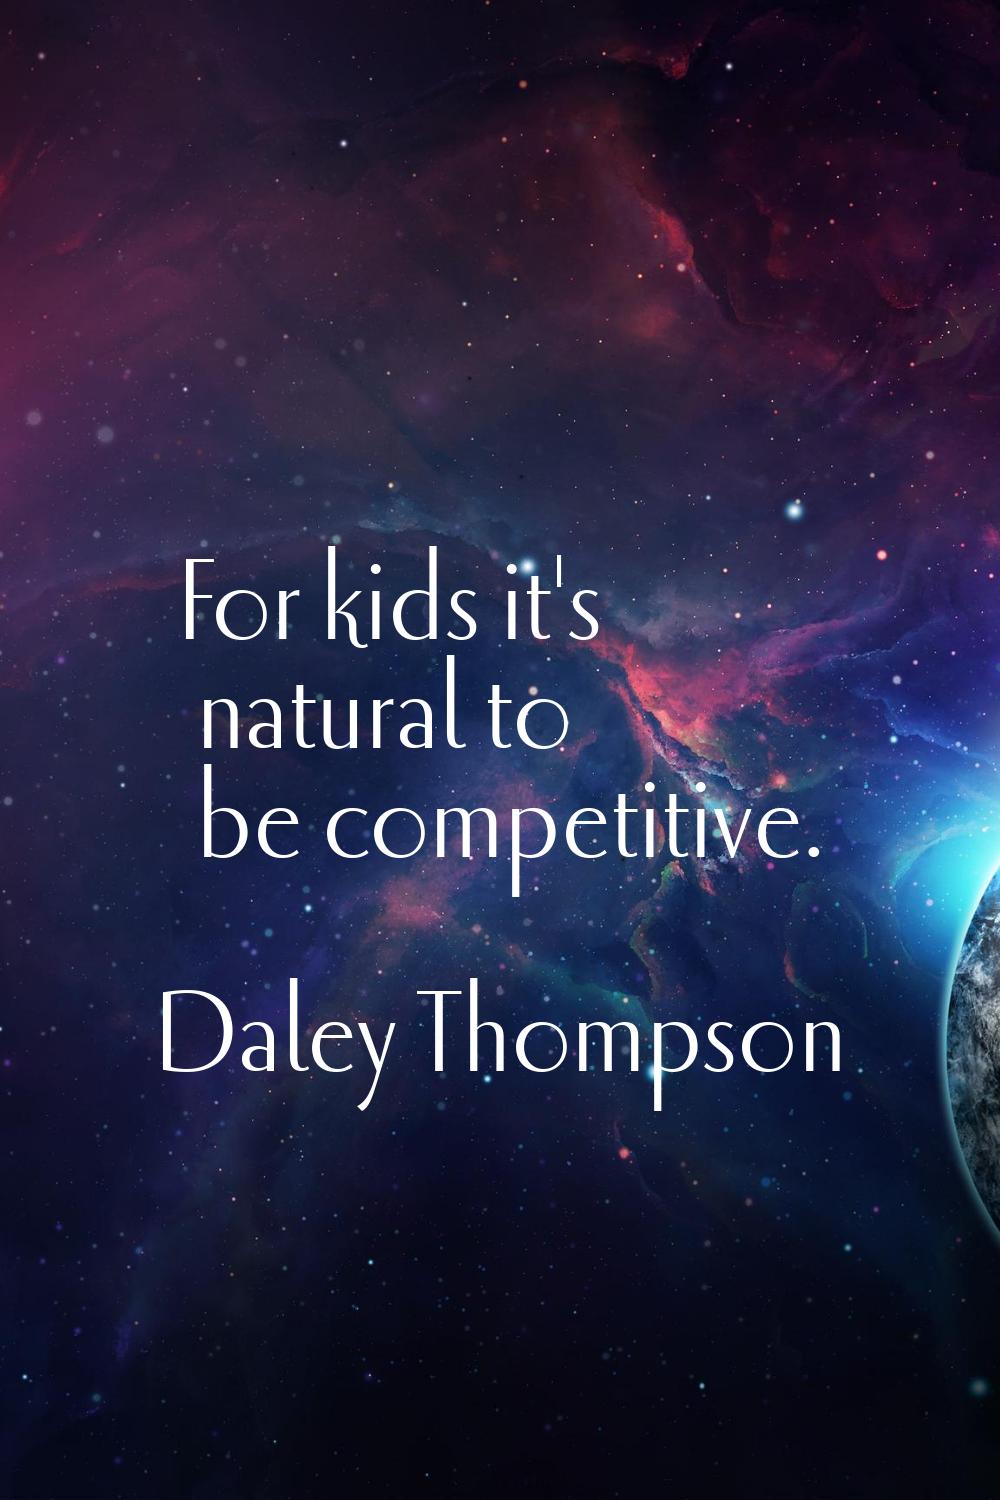 For kids it's natural to be competitive.